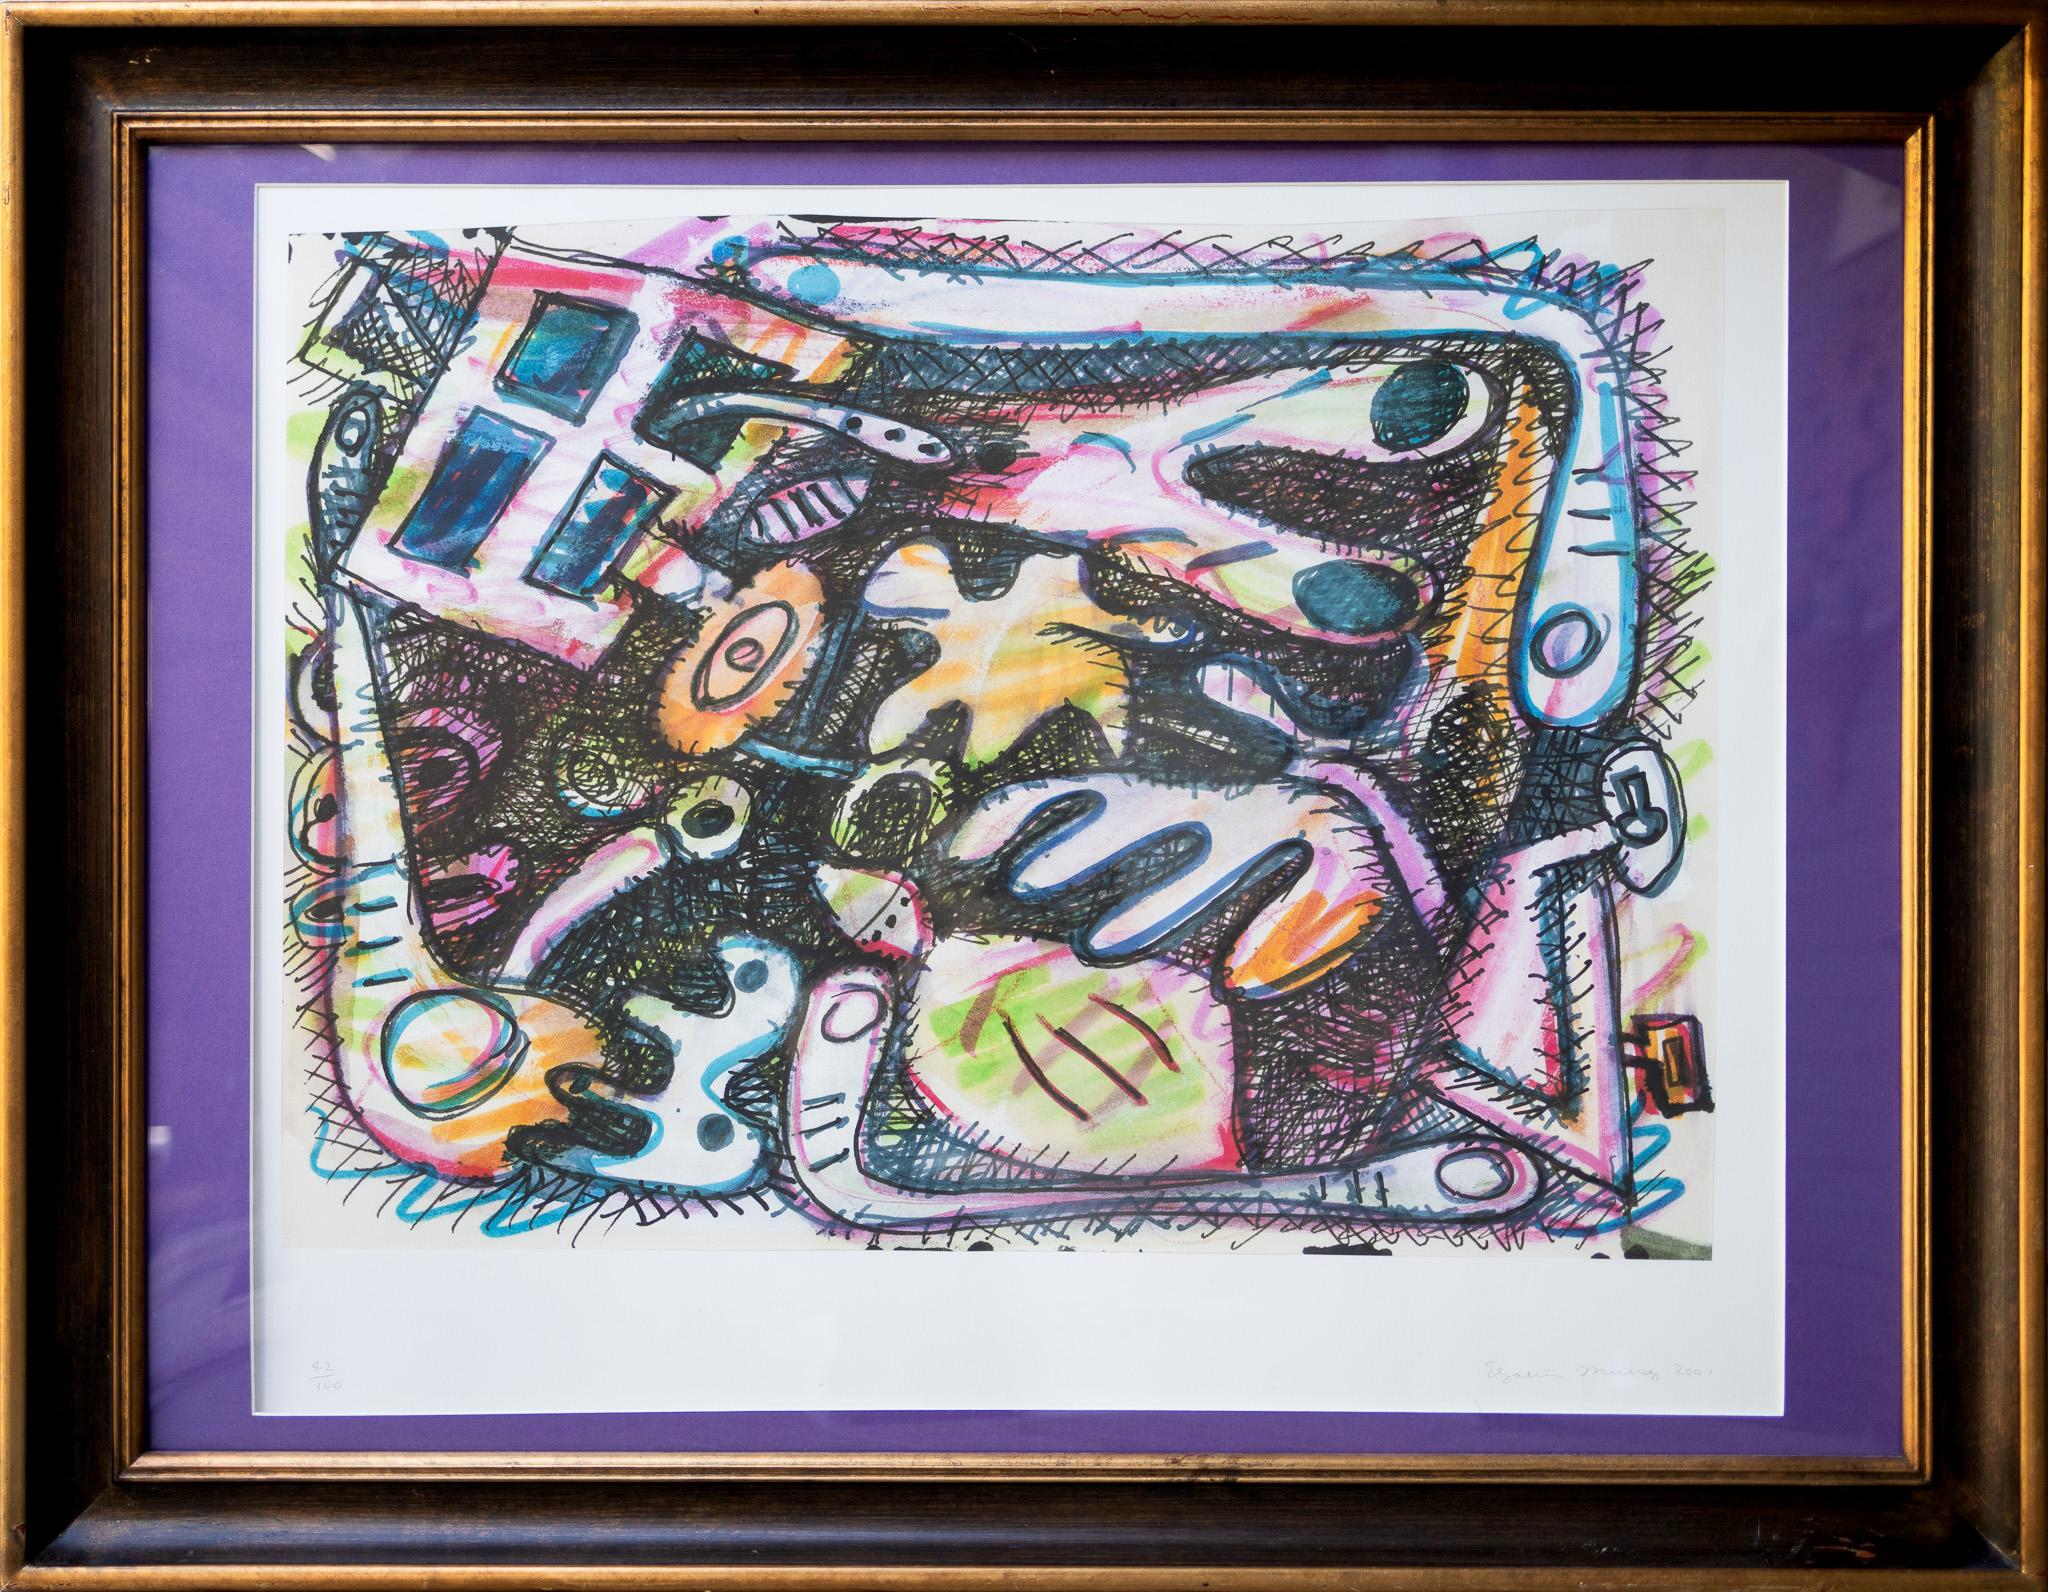 Abstract Print Elizabeth Murray - "Untitled Abstract" Art Colorful Graphic Black Pink Orange Purple Blue Pop Art